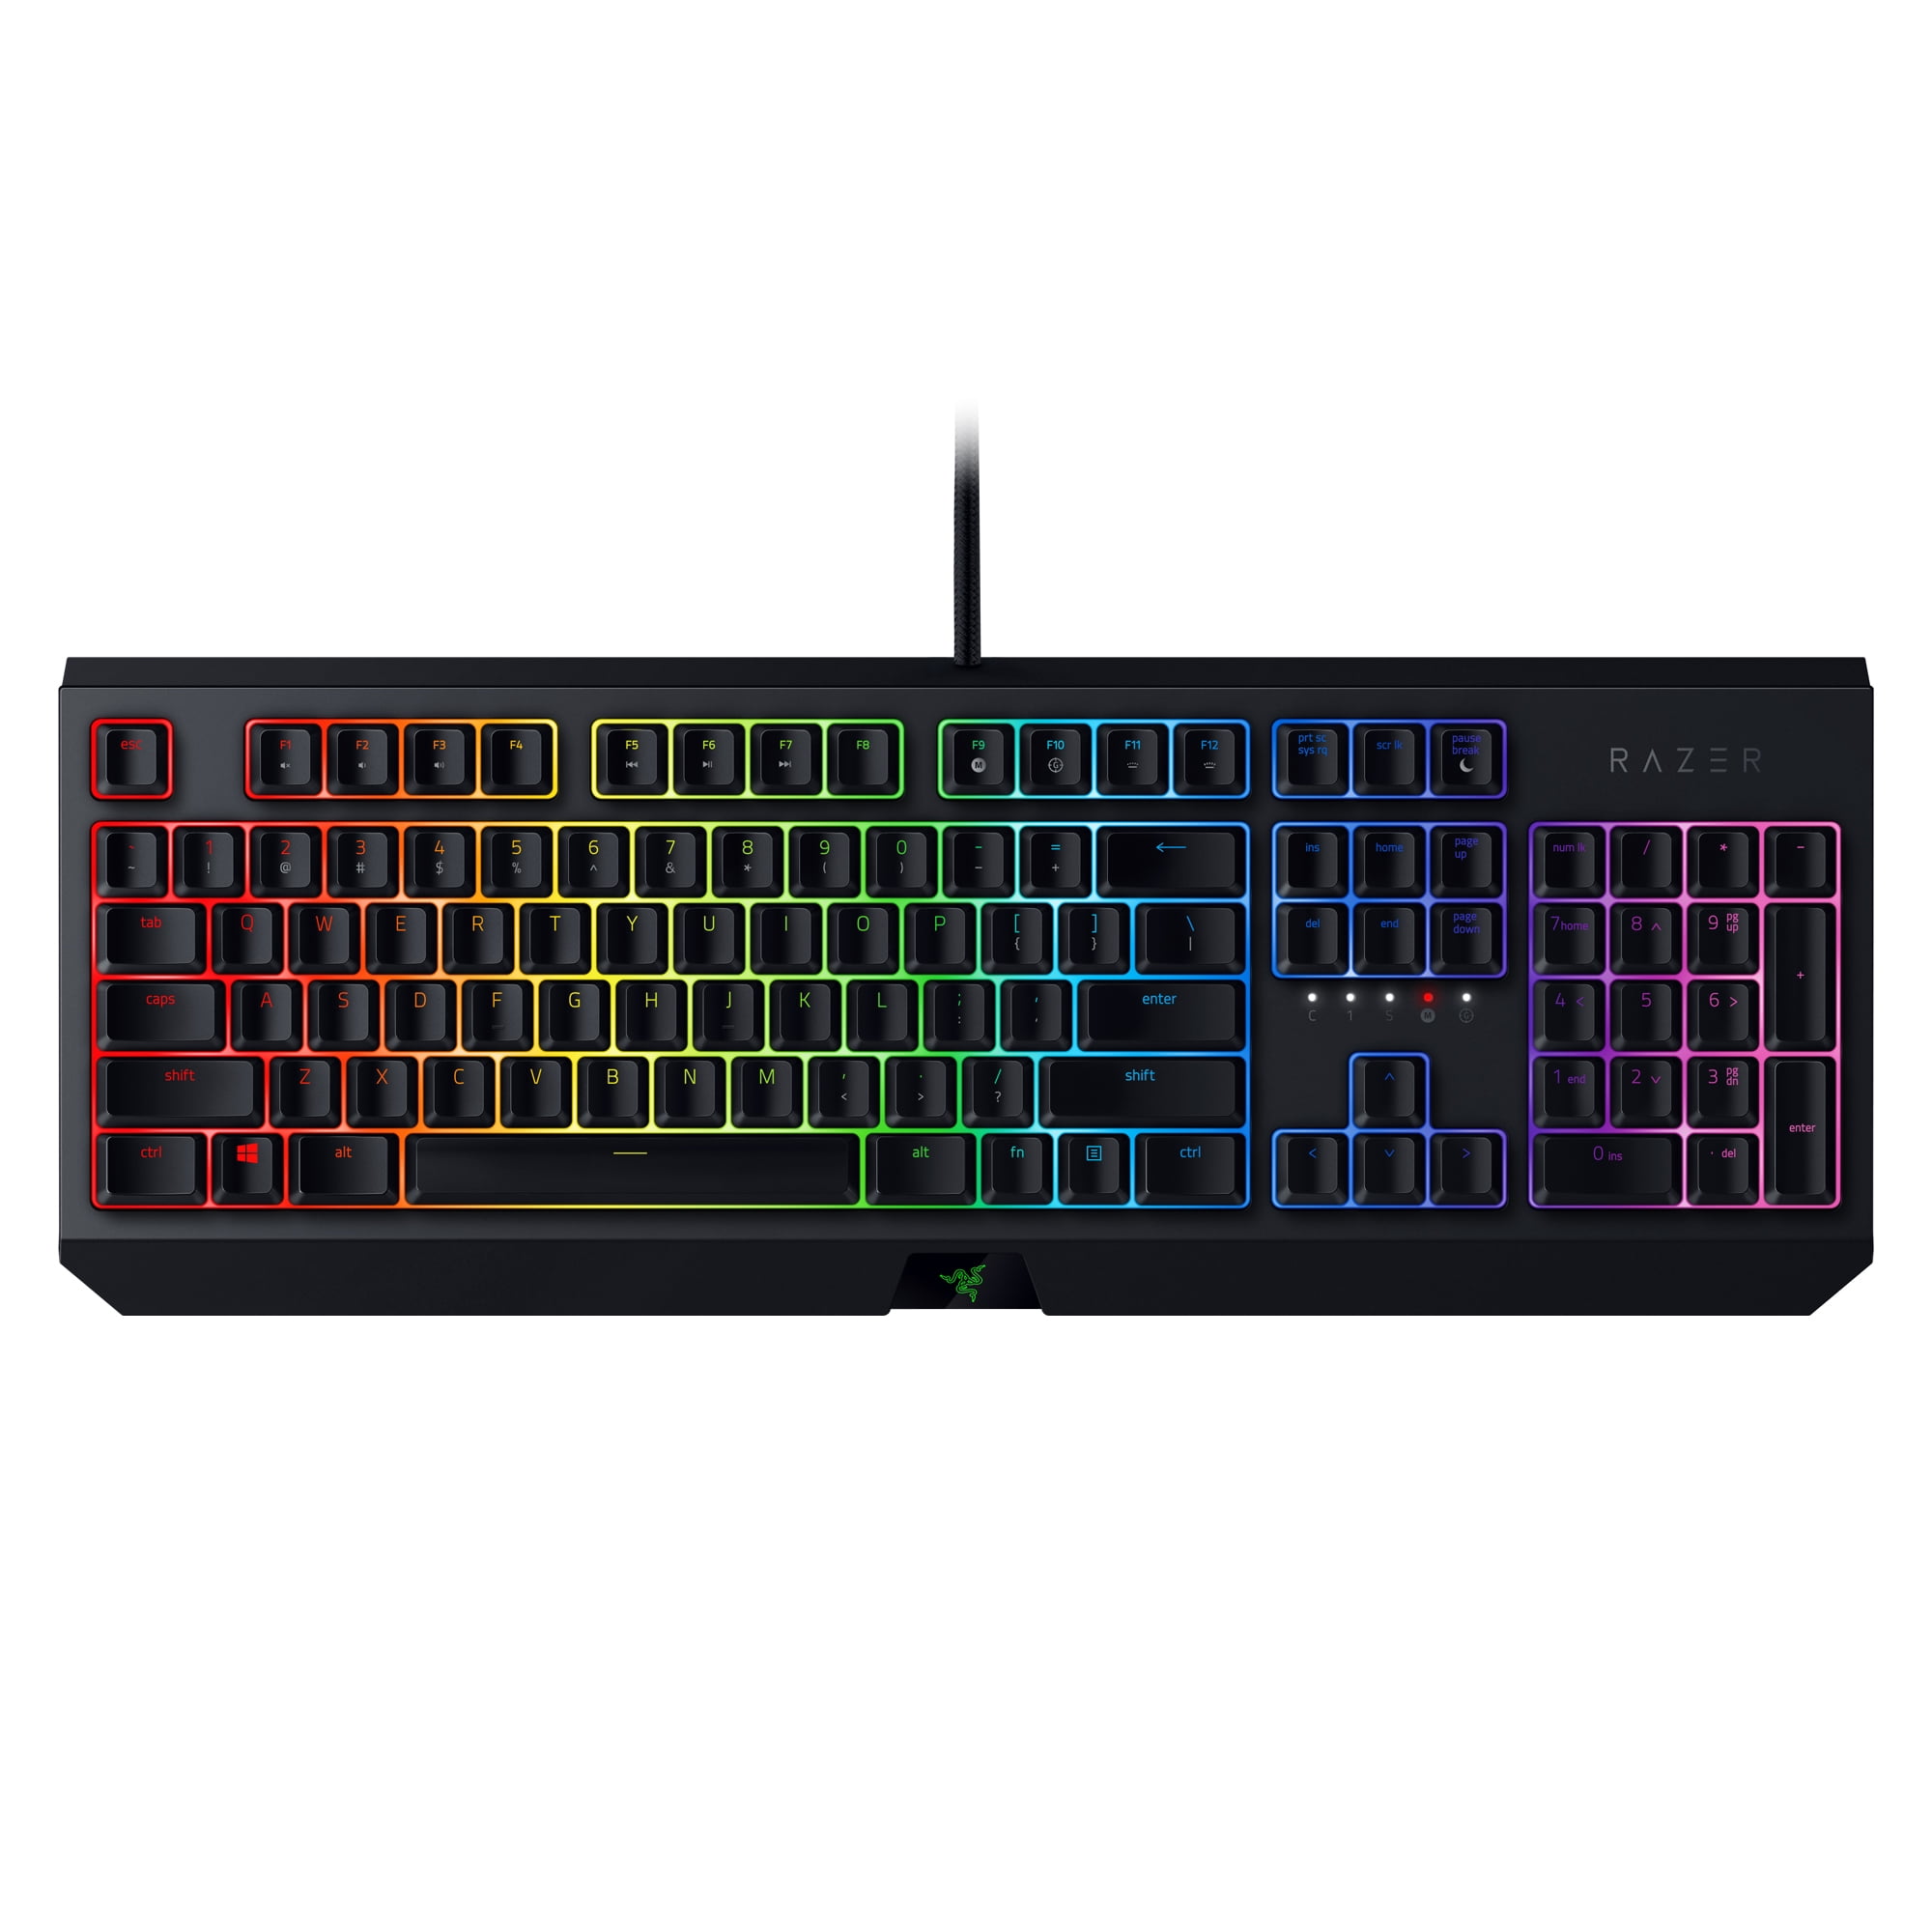 Razer BlackWidow Wired Gaming Keyboard for PC, Green Mechanical Switches, Chroma RGB Lighting, Hybrid On-Board Memory, N-Key Rollover, Up to 80 Million Key Strokes, Easy Cable Management, Black